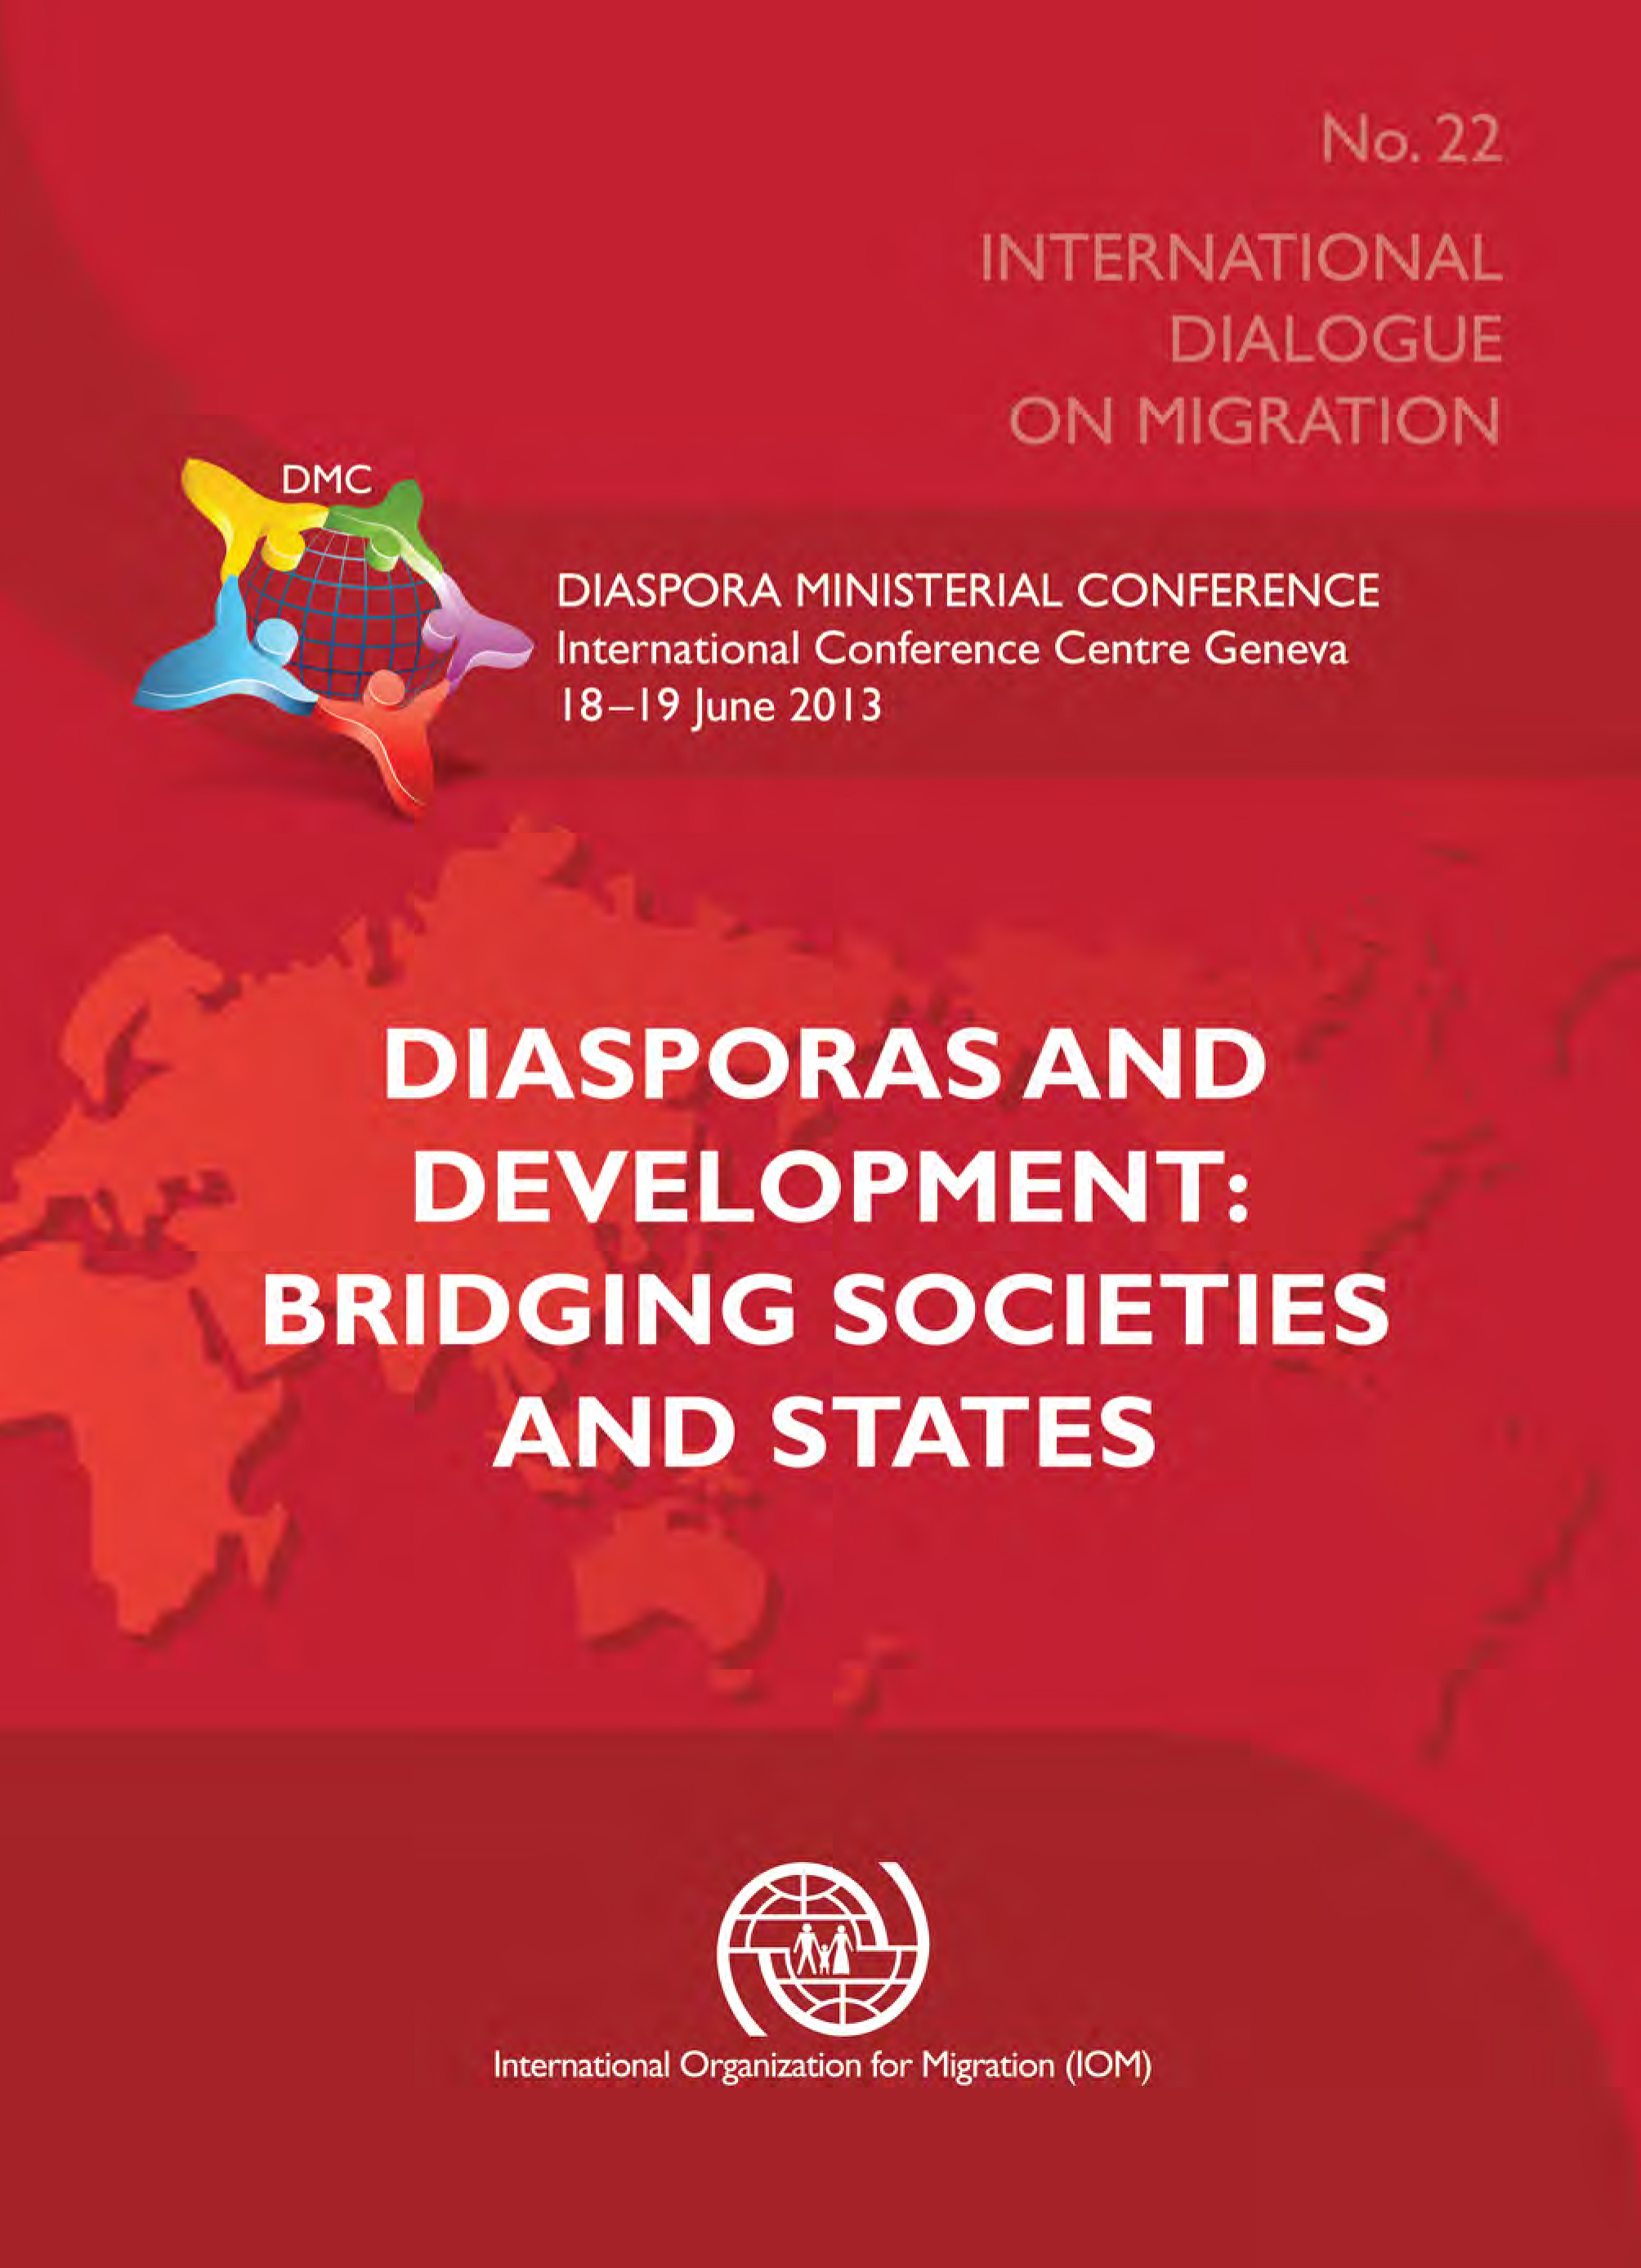 image of International Dialogue on Migration No. 22